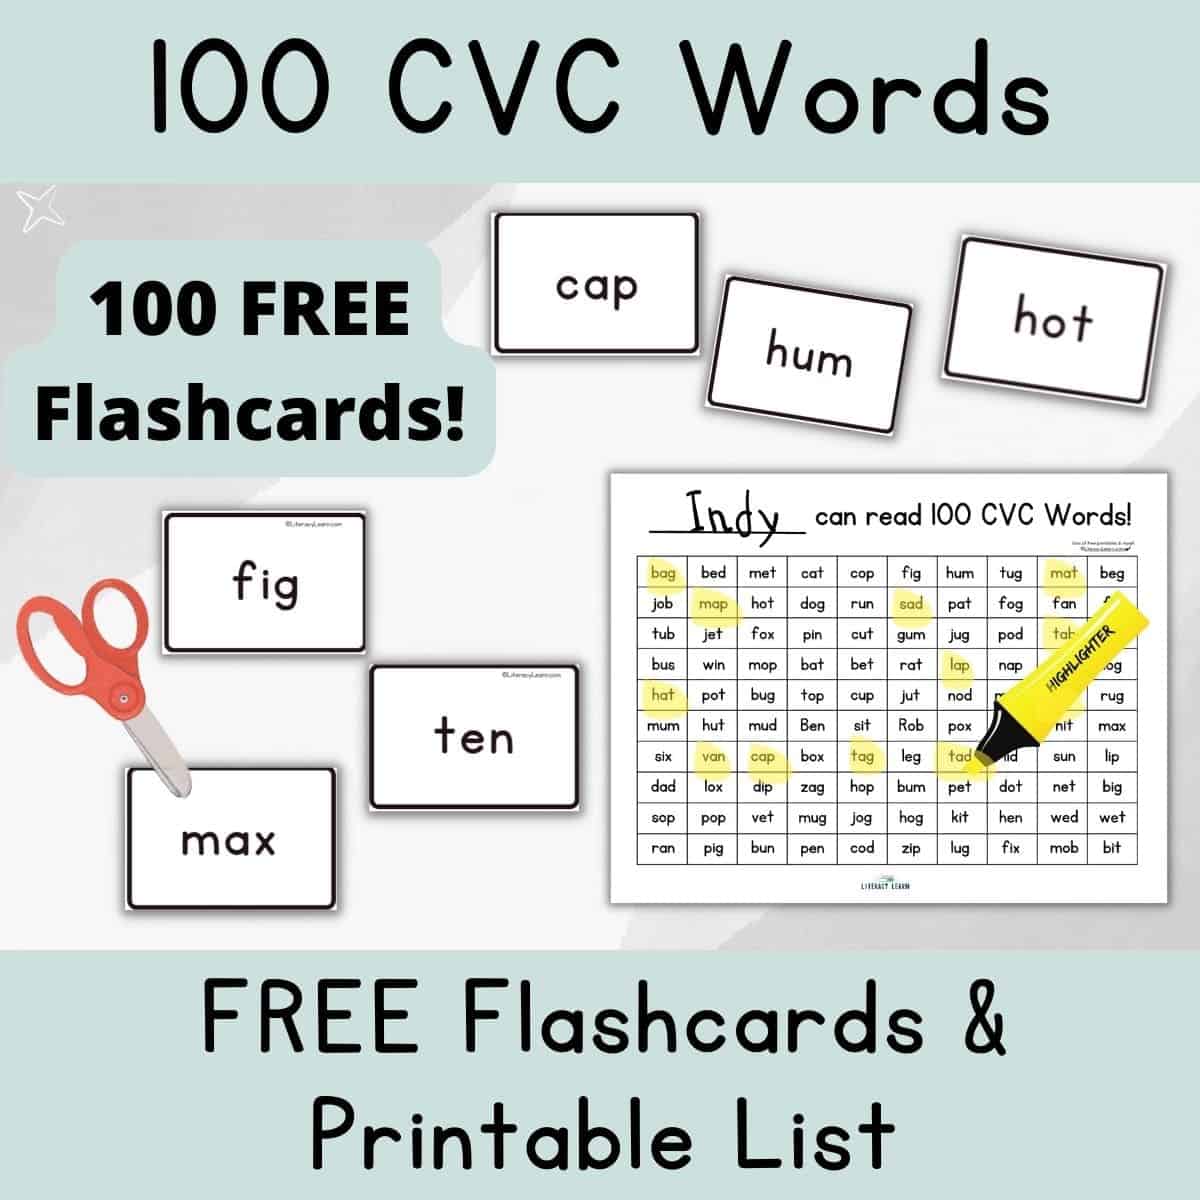 Graphic entitled "100 CVC Words" with pictures of free flashcards and free printable list.